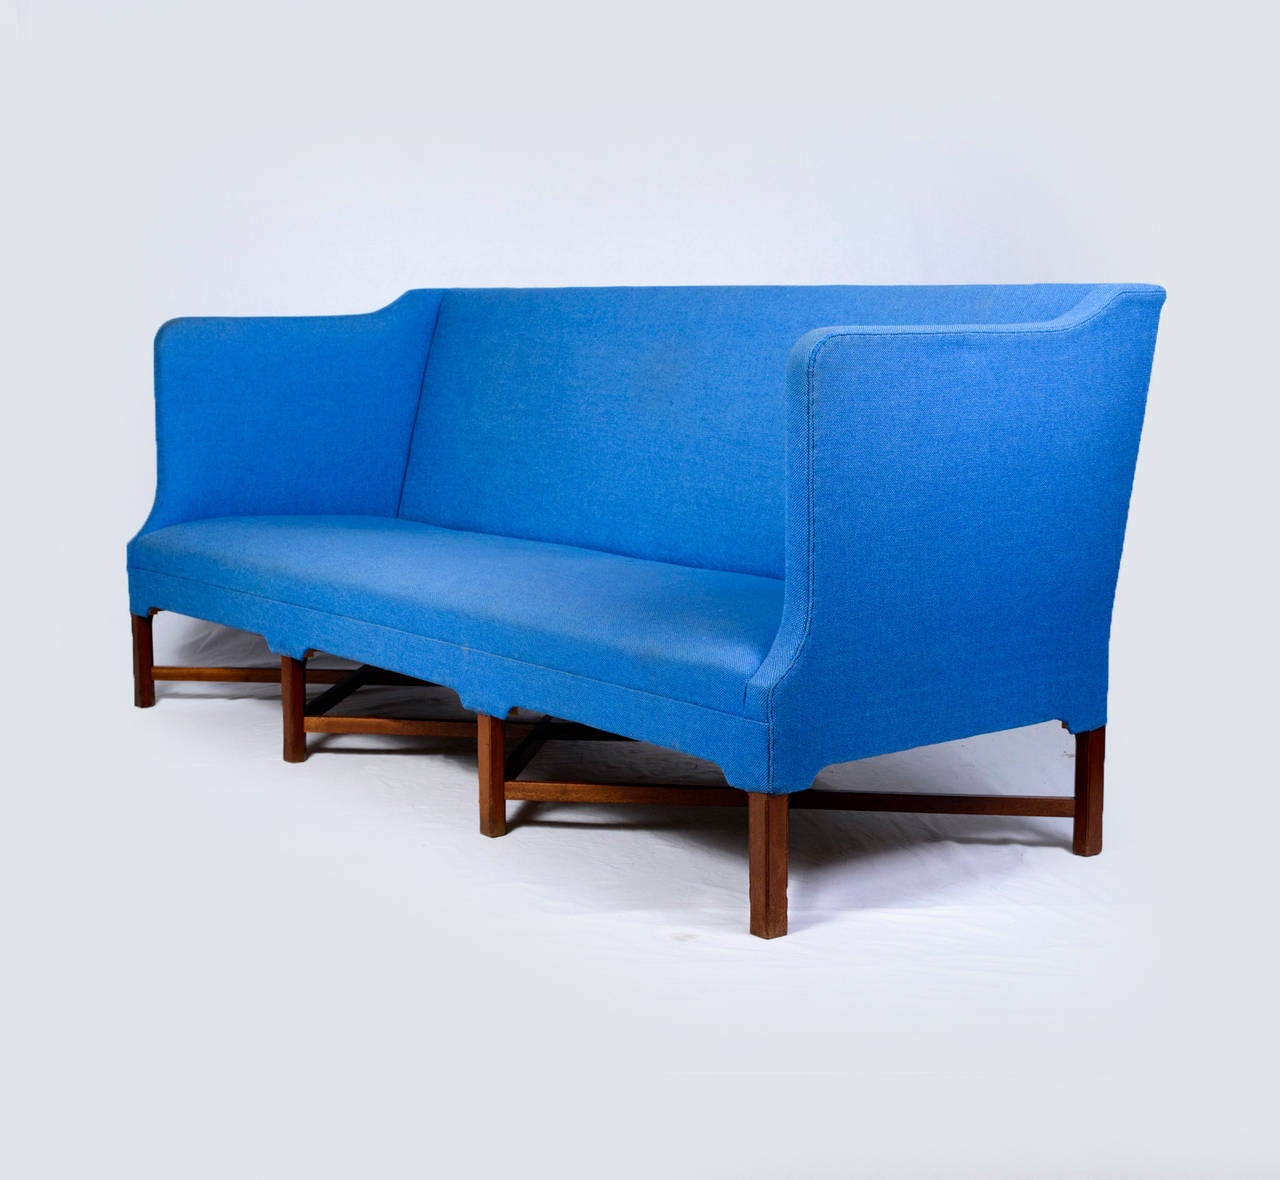 Kaare Klint X-base sofa, model #4118. Designed in 1930 and produced by Rud Rasmussen.   Store formerly known as ARTFUL DODGER INC